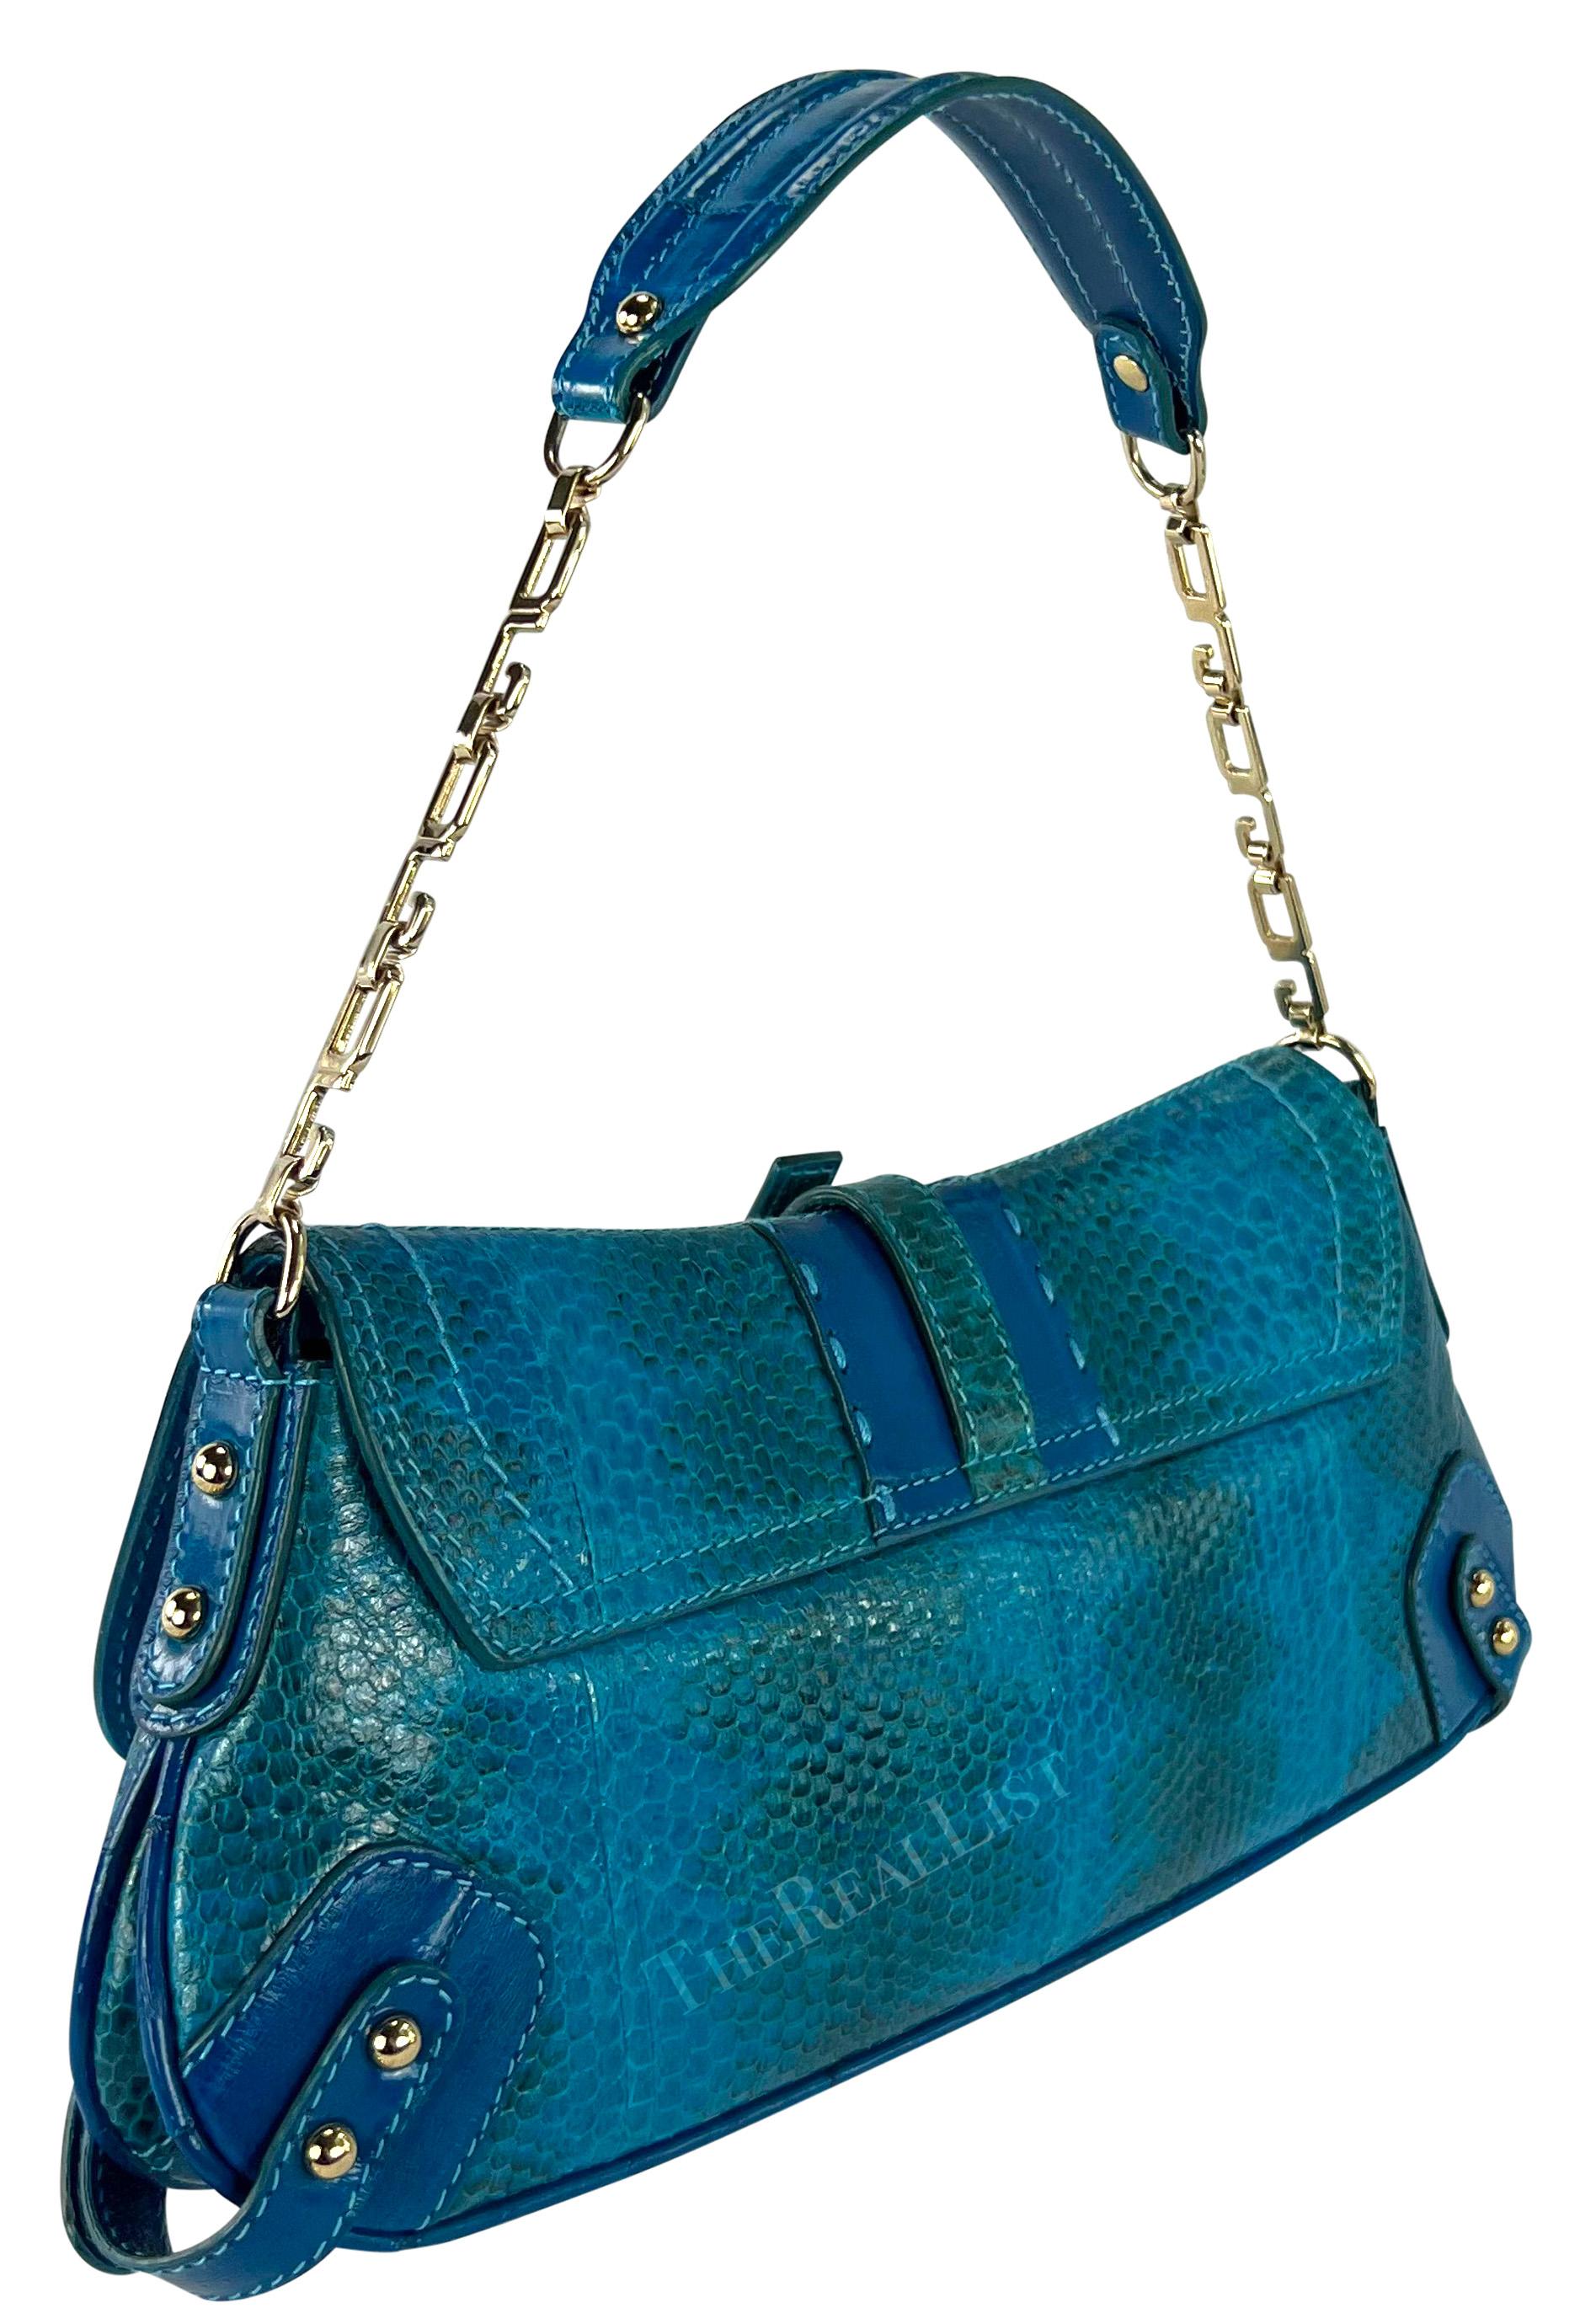 Women's or Men's F/W 2004 Dolce & Gabbana Bright Blue Gold DG Chain Small Embossed Shoulder Bag For Sale